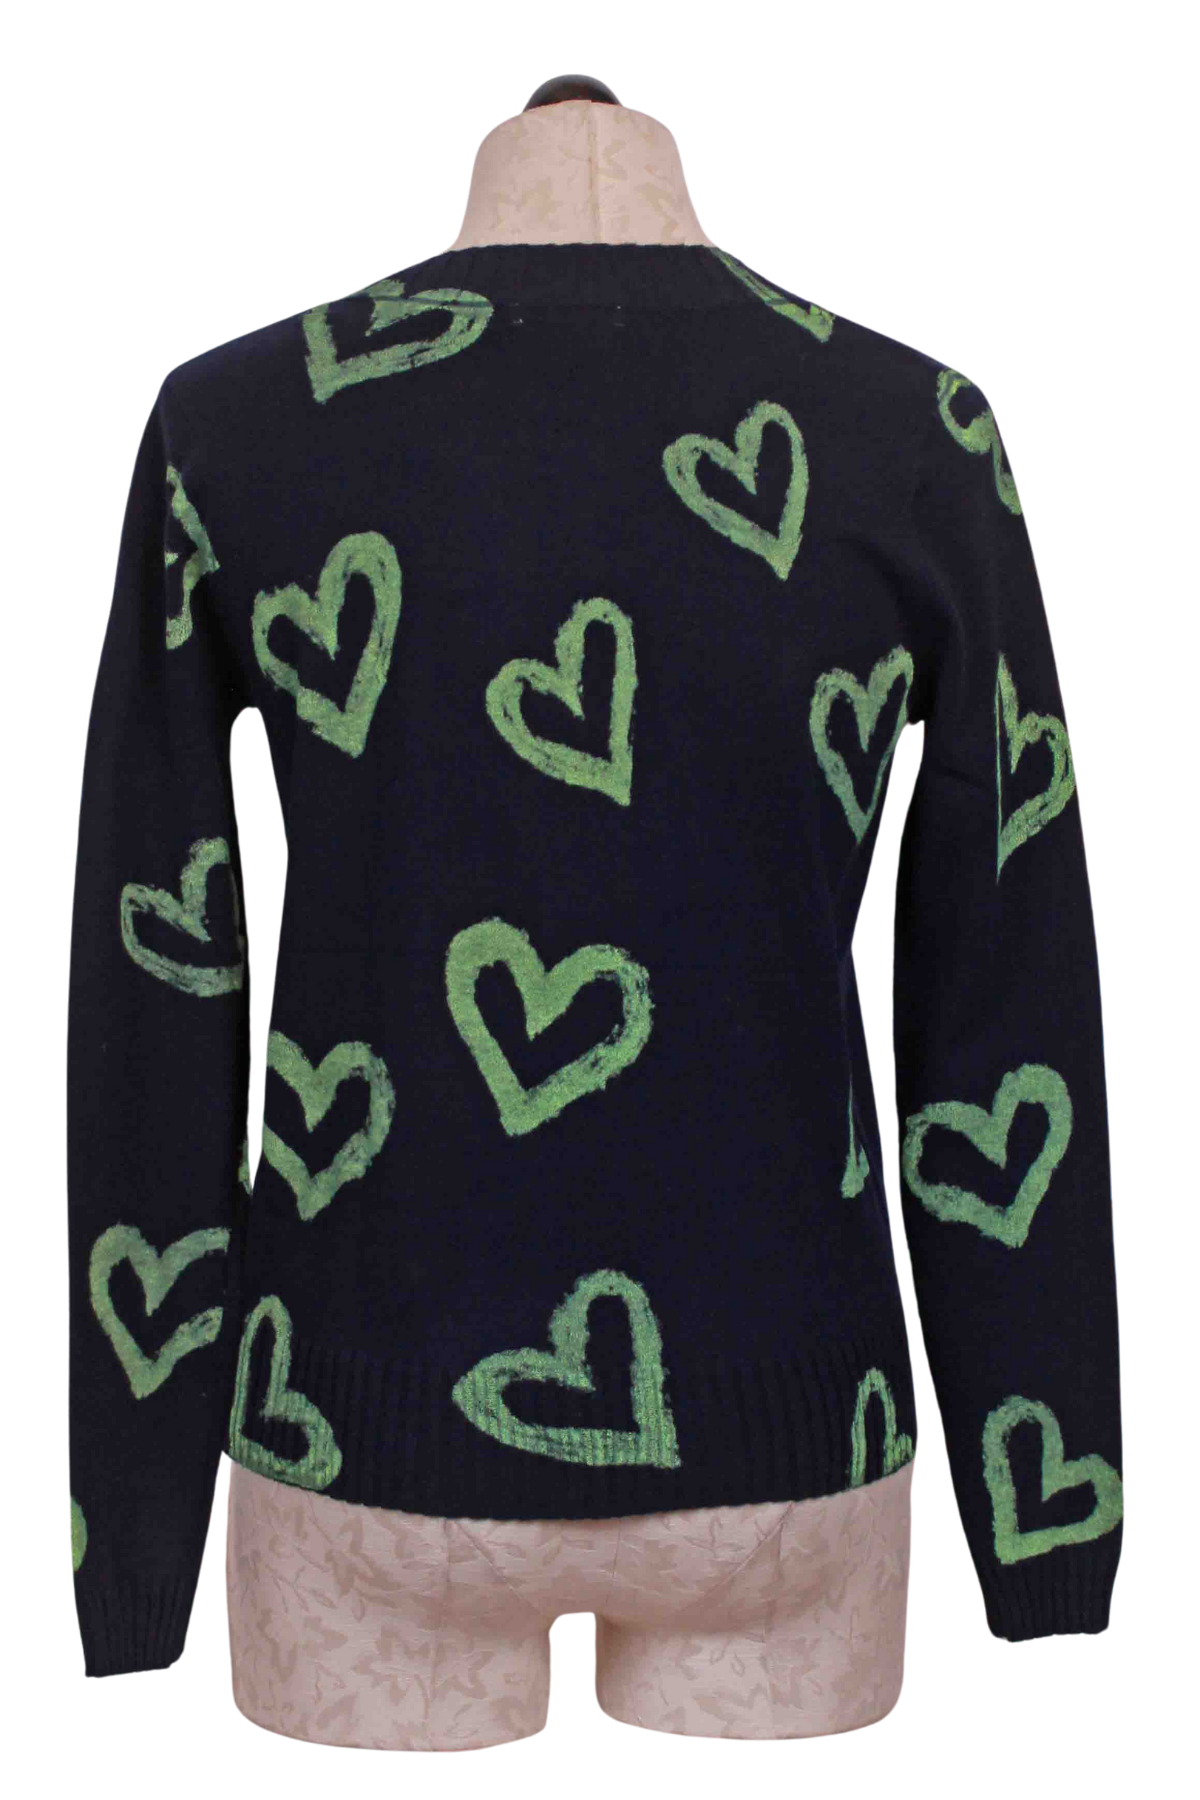 back view of Navy and green Love Zone Sweater by Lisa Todd